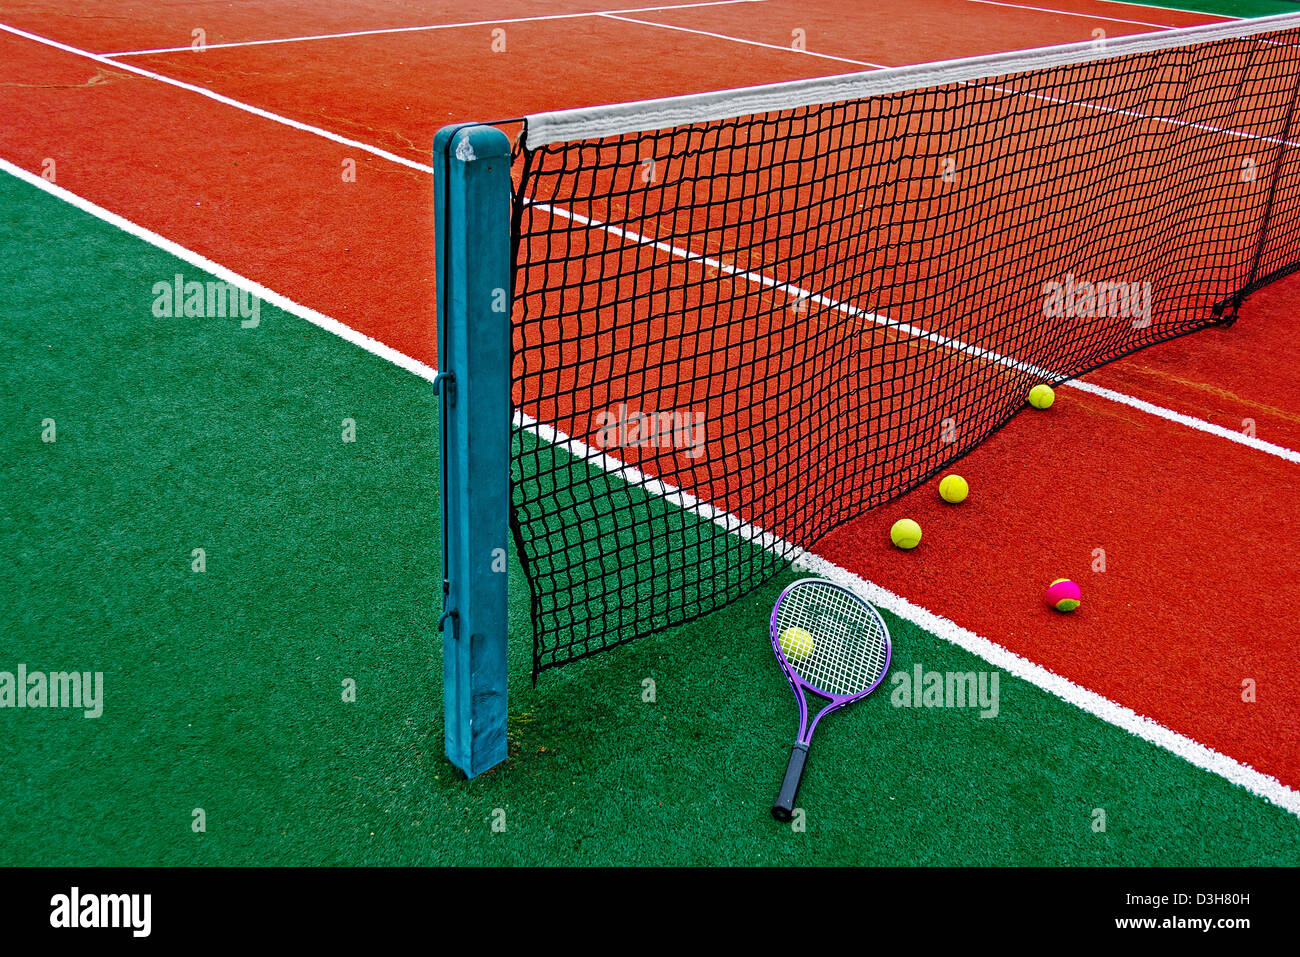 Ball and tennis racket arranged around the net on a synthetic field. Stock Photo